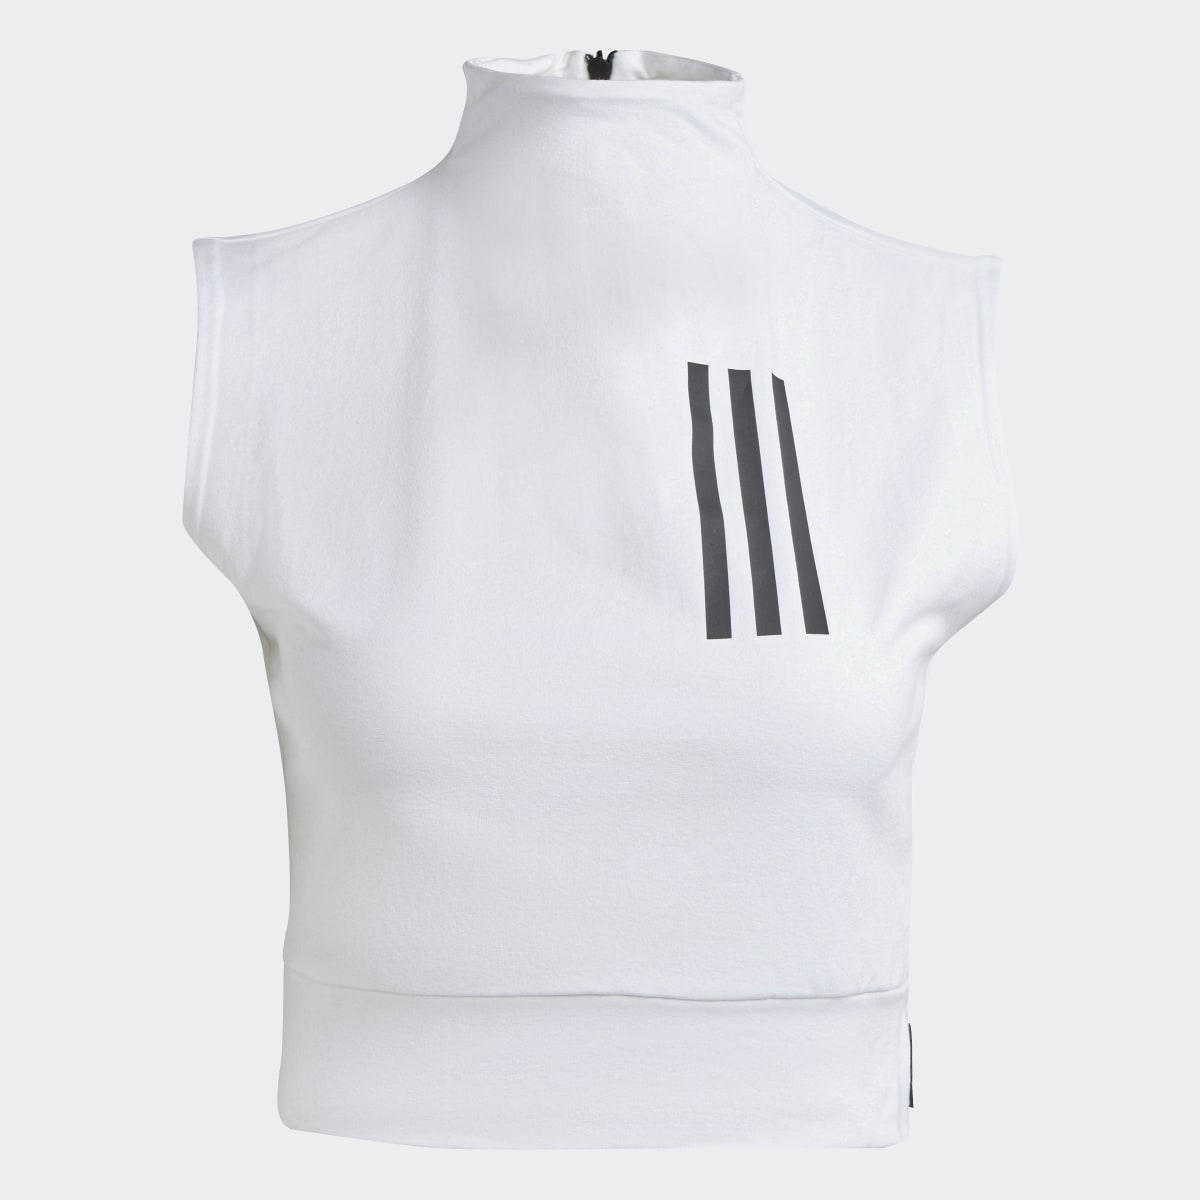 Adidas Top Mission Victory Sleeveless Cropped. 5